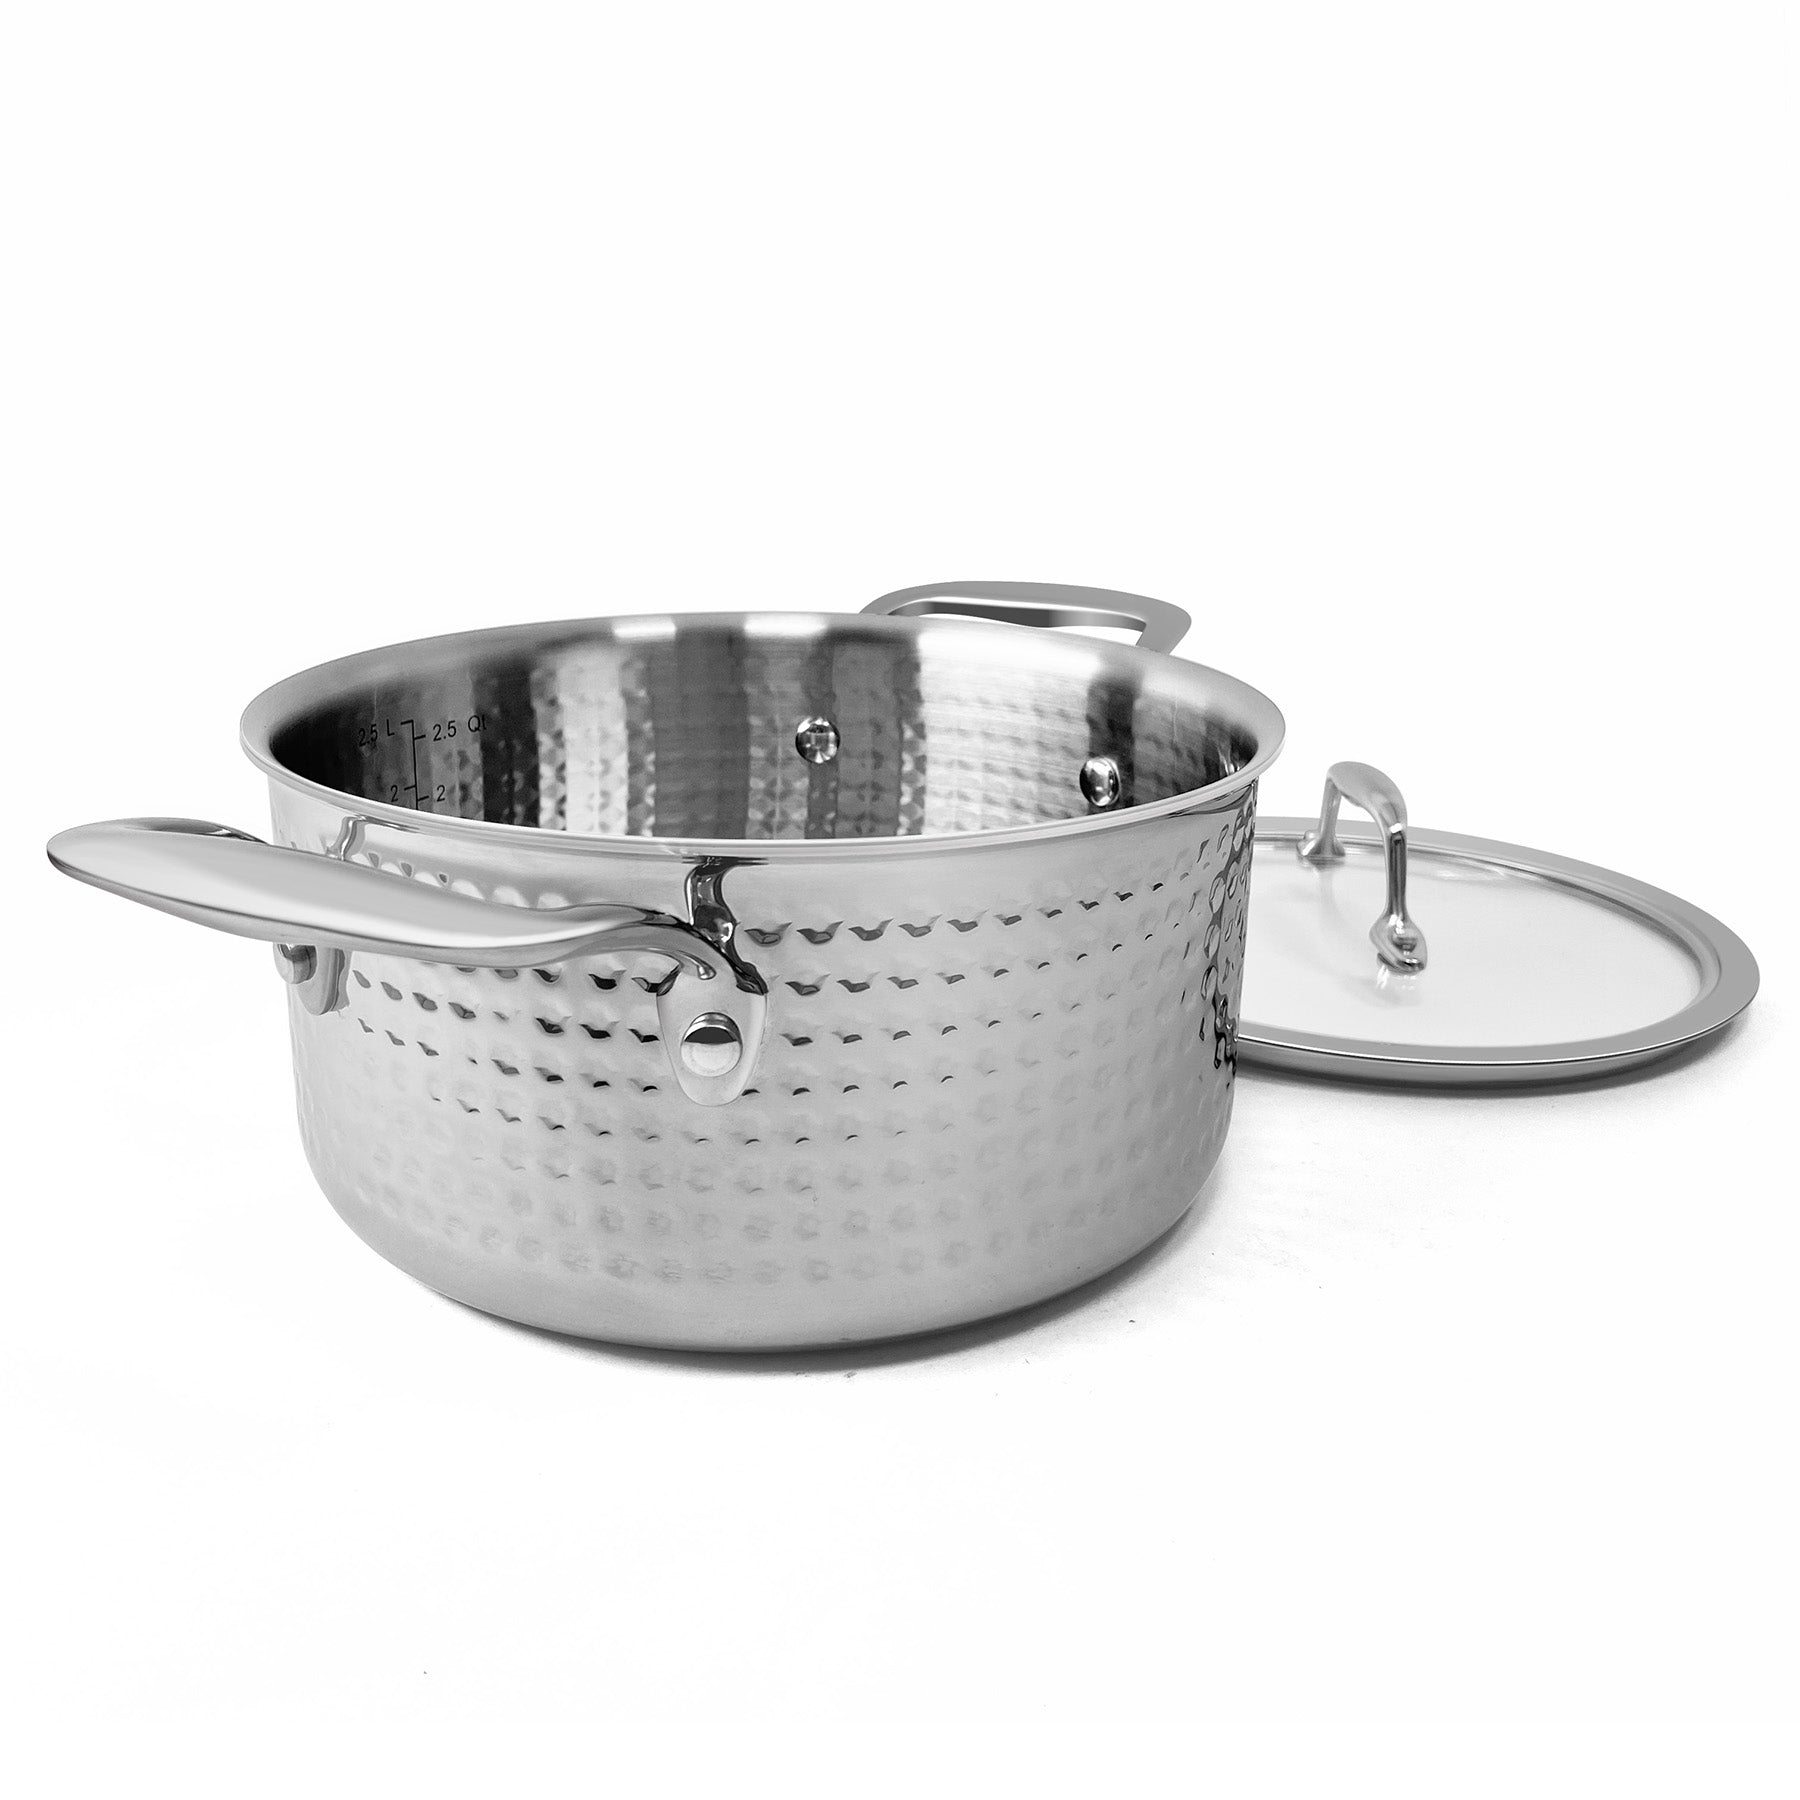 Fortune Candy Stock Pot, 18/8 Stainless Steel, Induction Ready, with Glass Lid, 3.2 QT